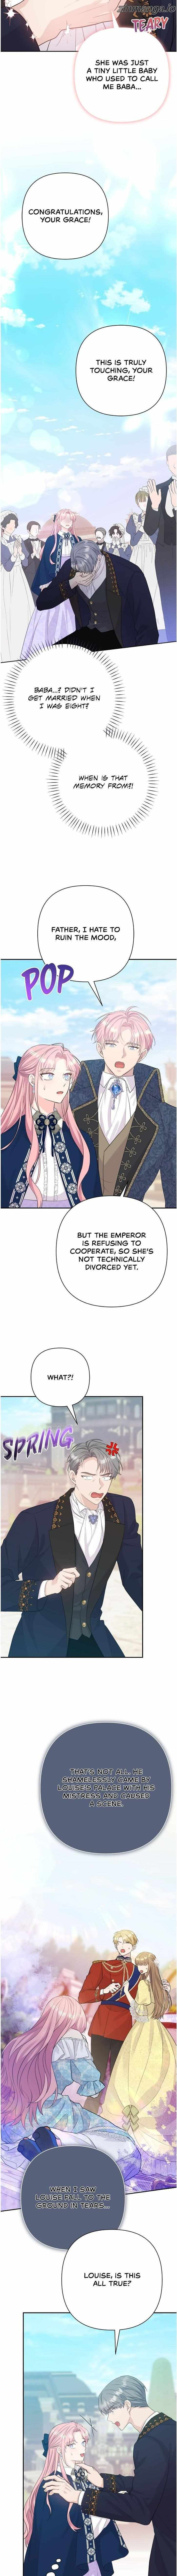 The Empress Wants To Avoid The Emperor - Page 2